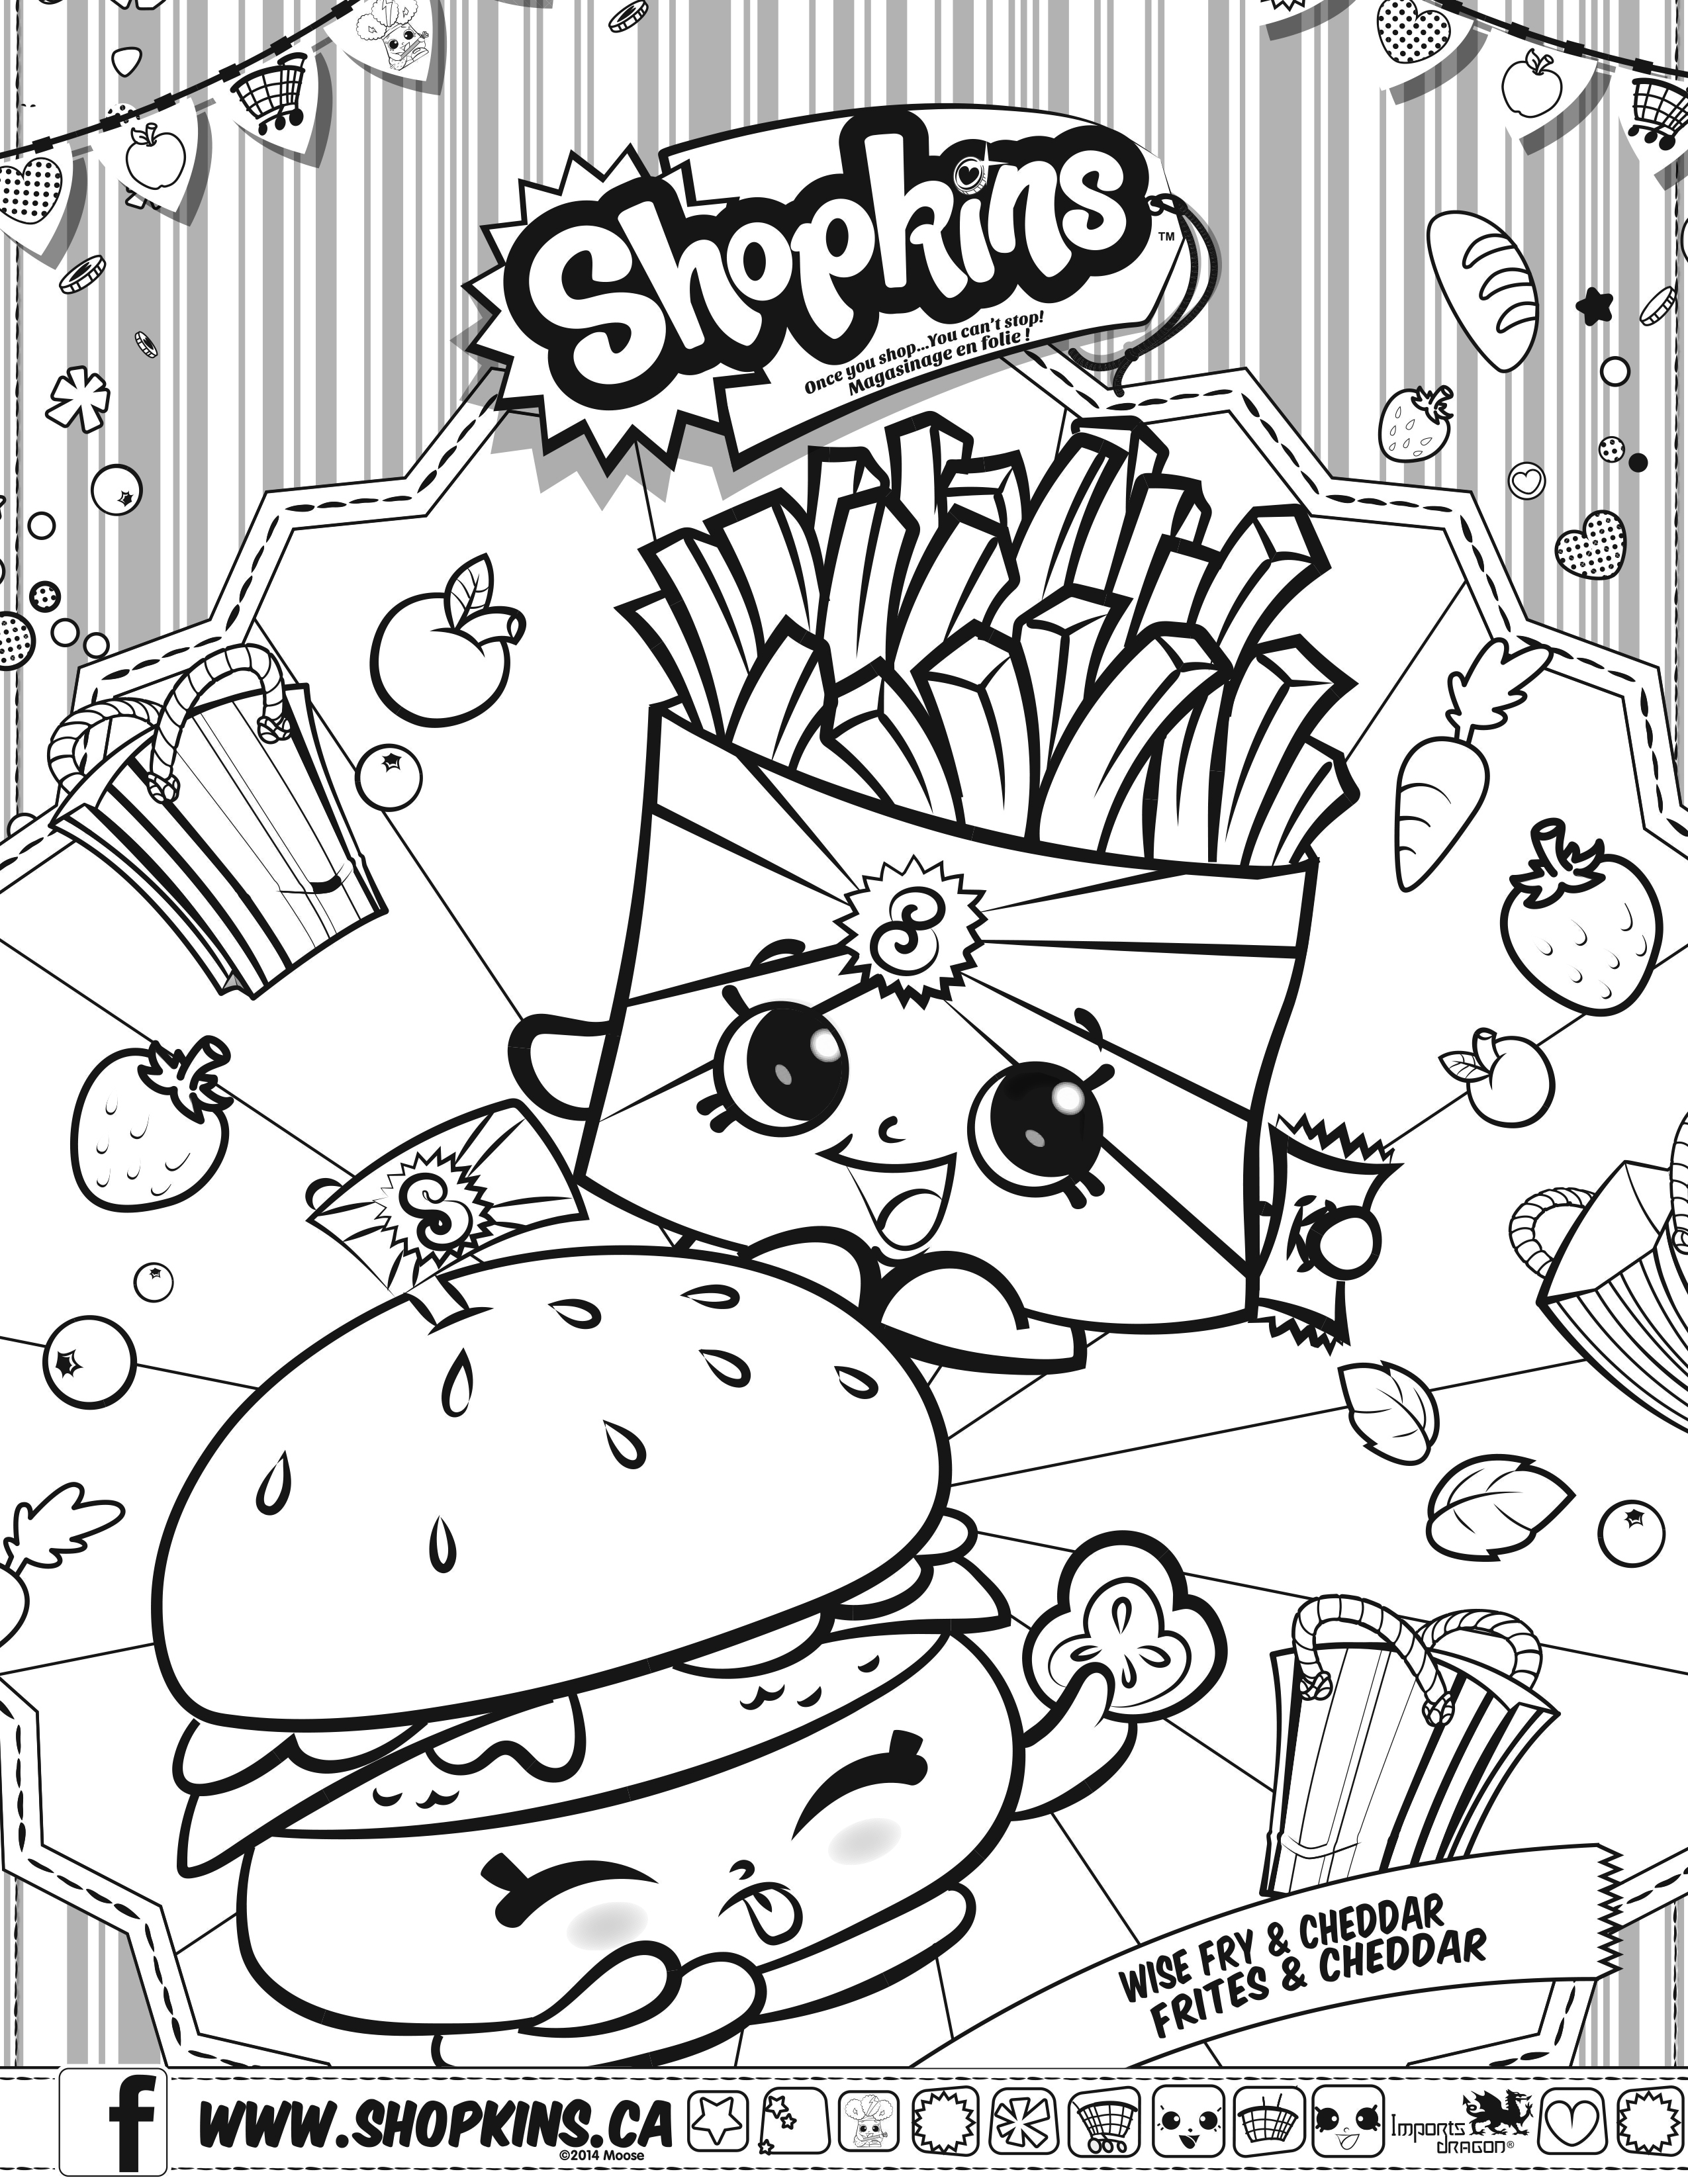 Shopkins coloring pages 7 - Diy Craft Ideas & Gardening